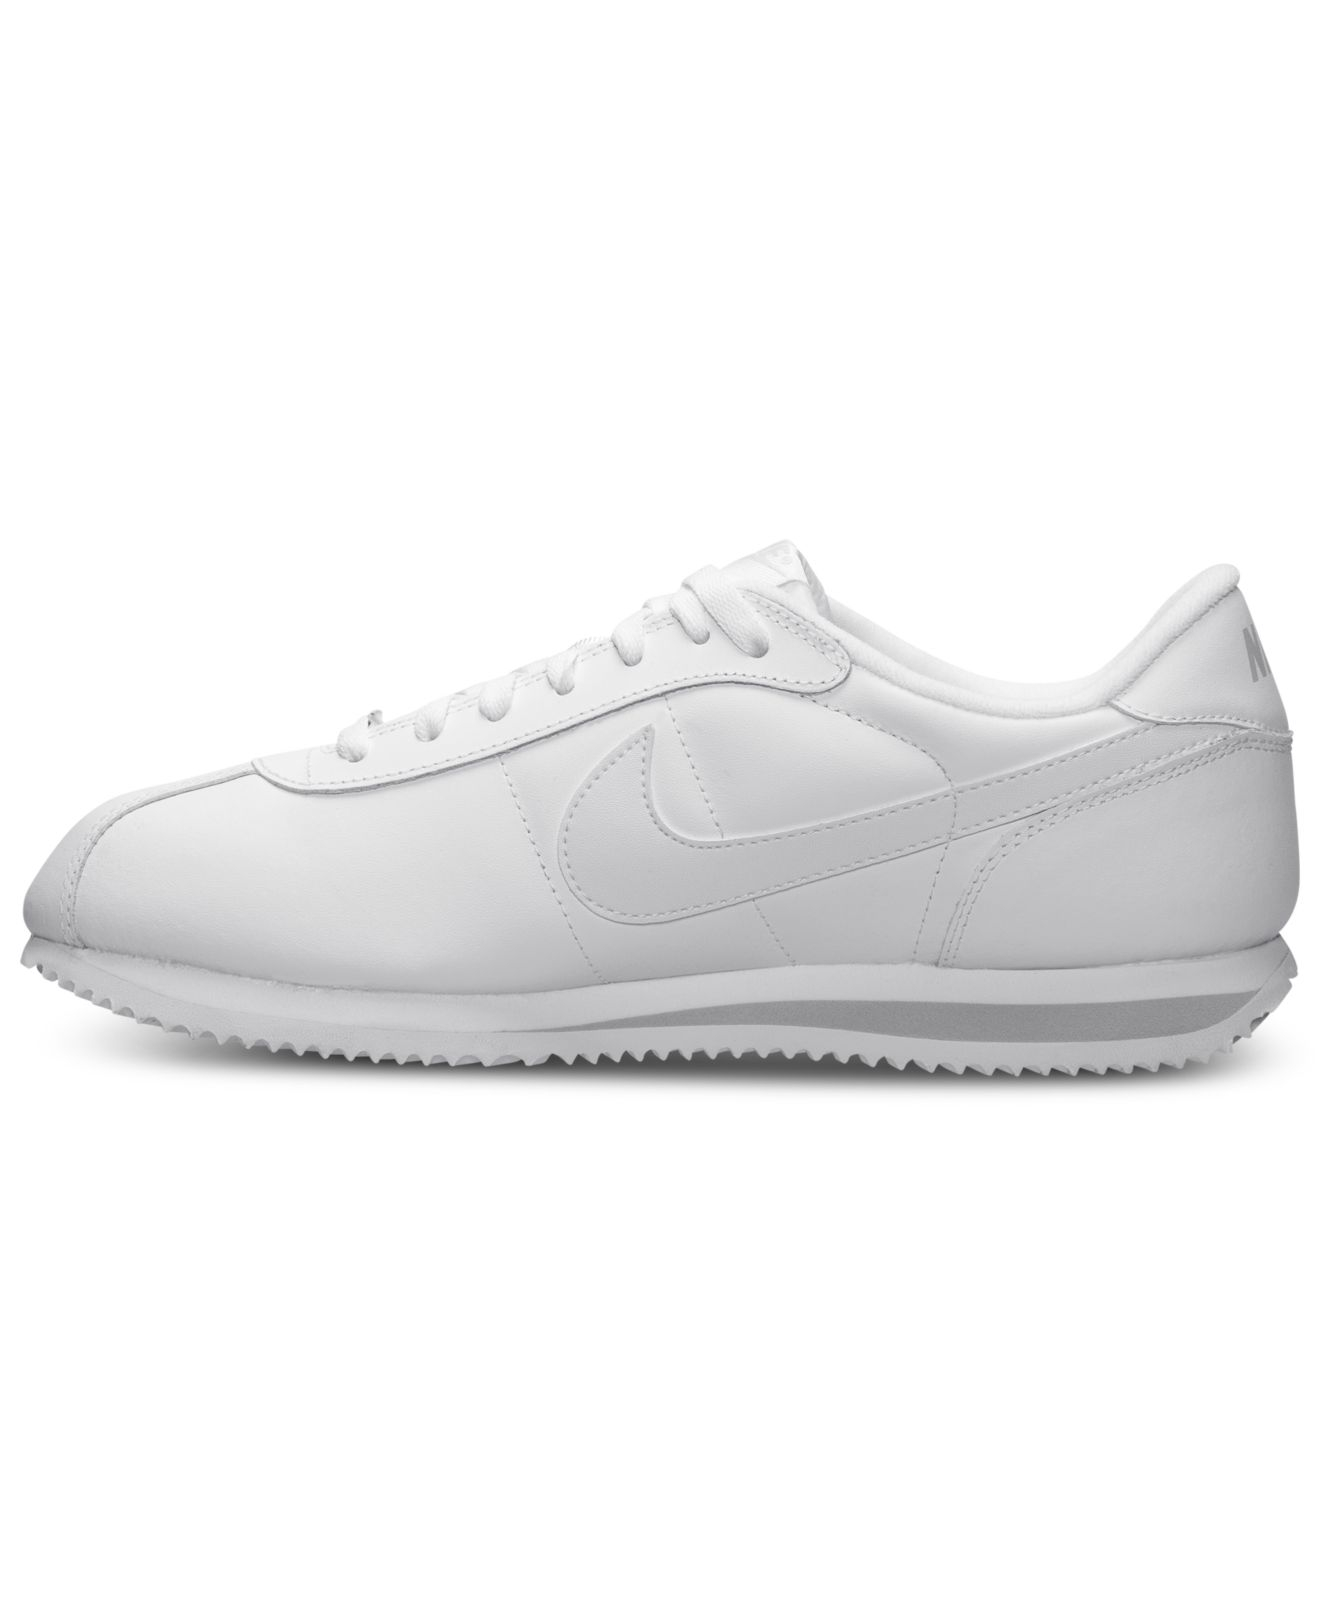 Lyst - Nike Men's Cortez Basic Leather Casual Sneakers From Finish Line ...